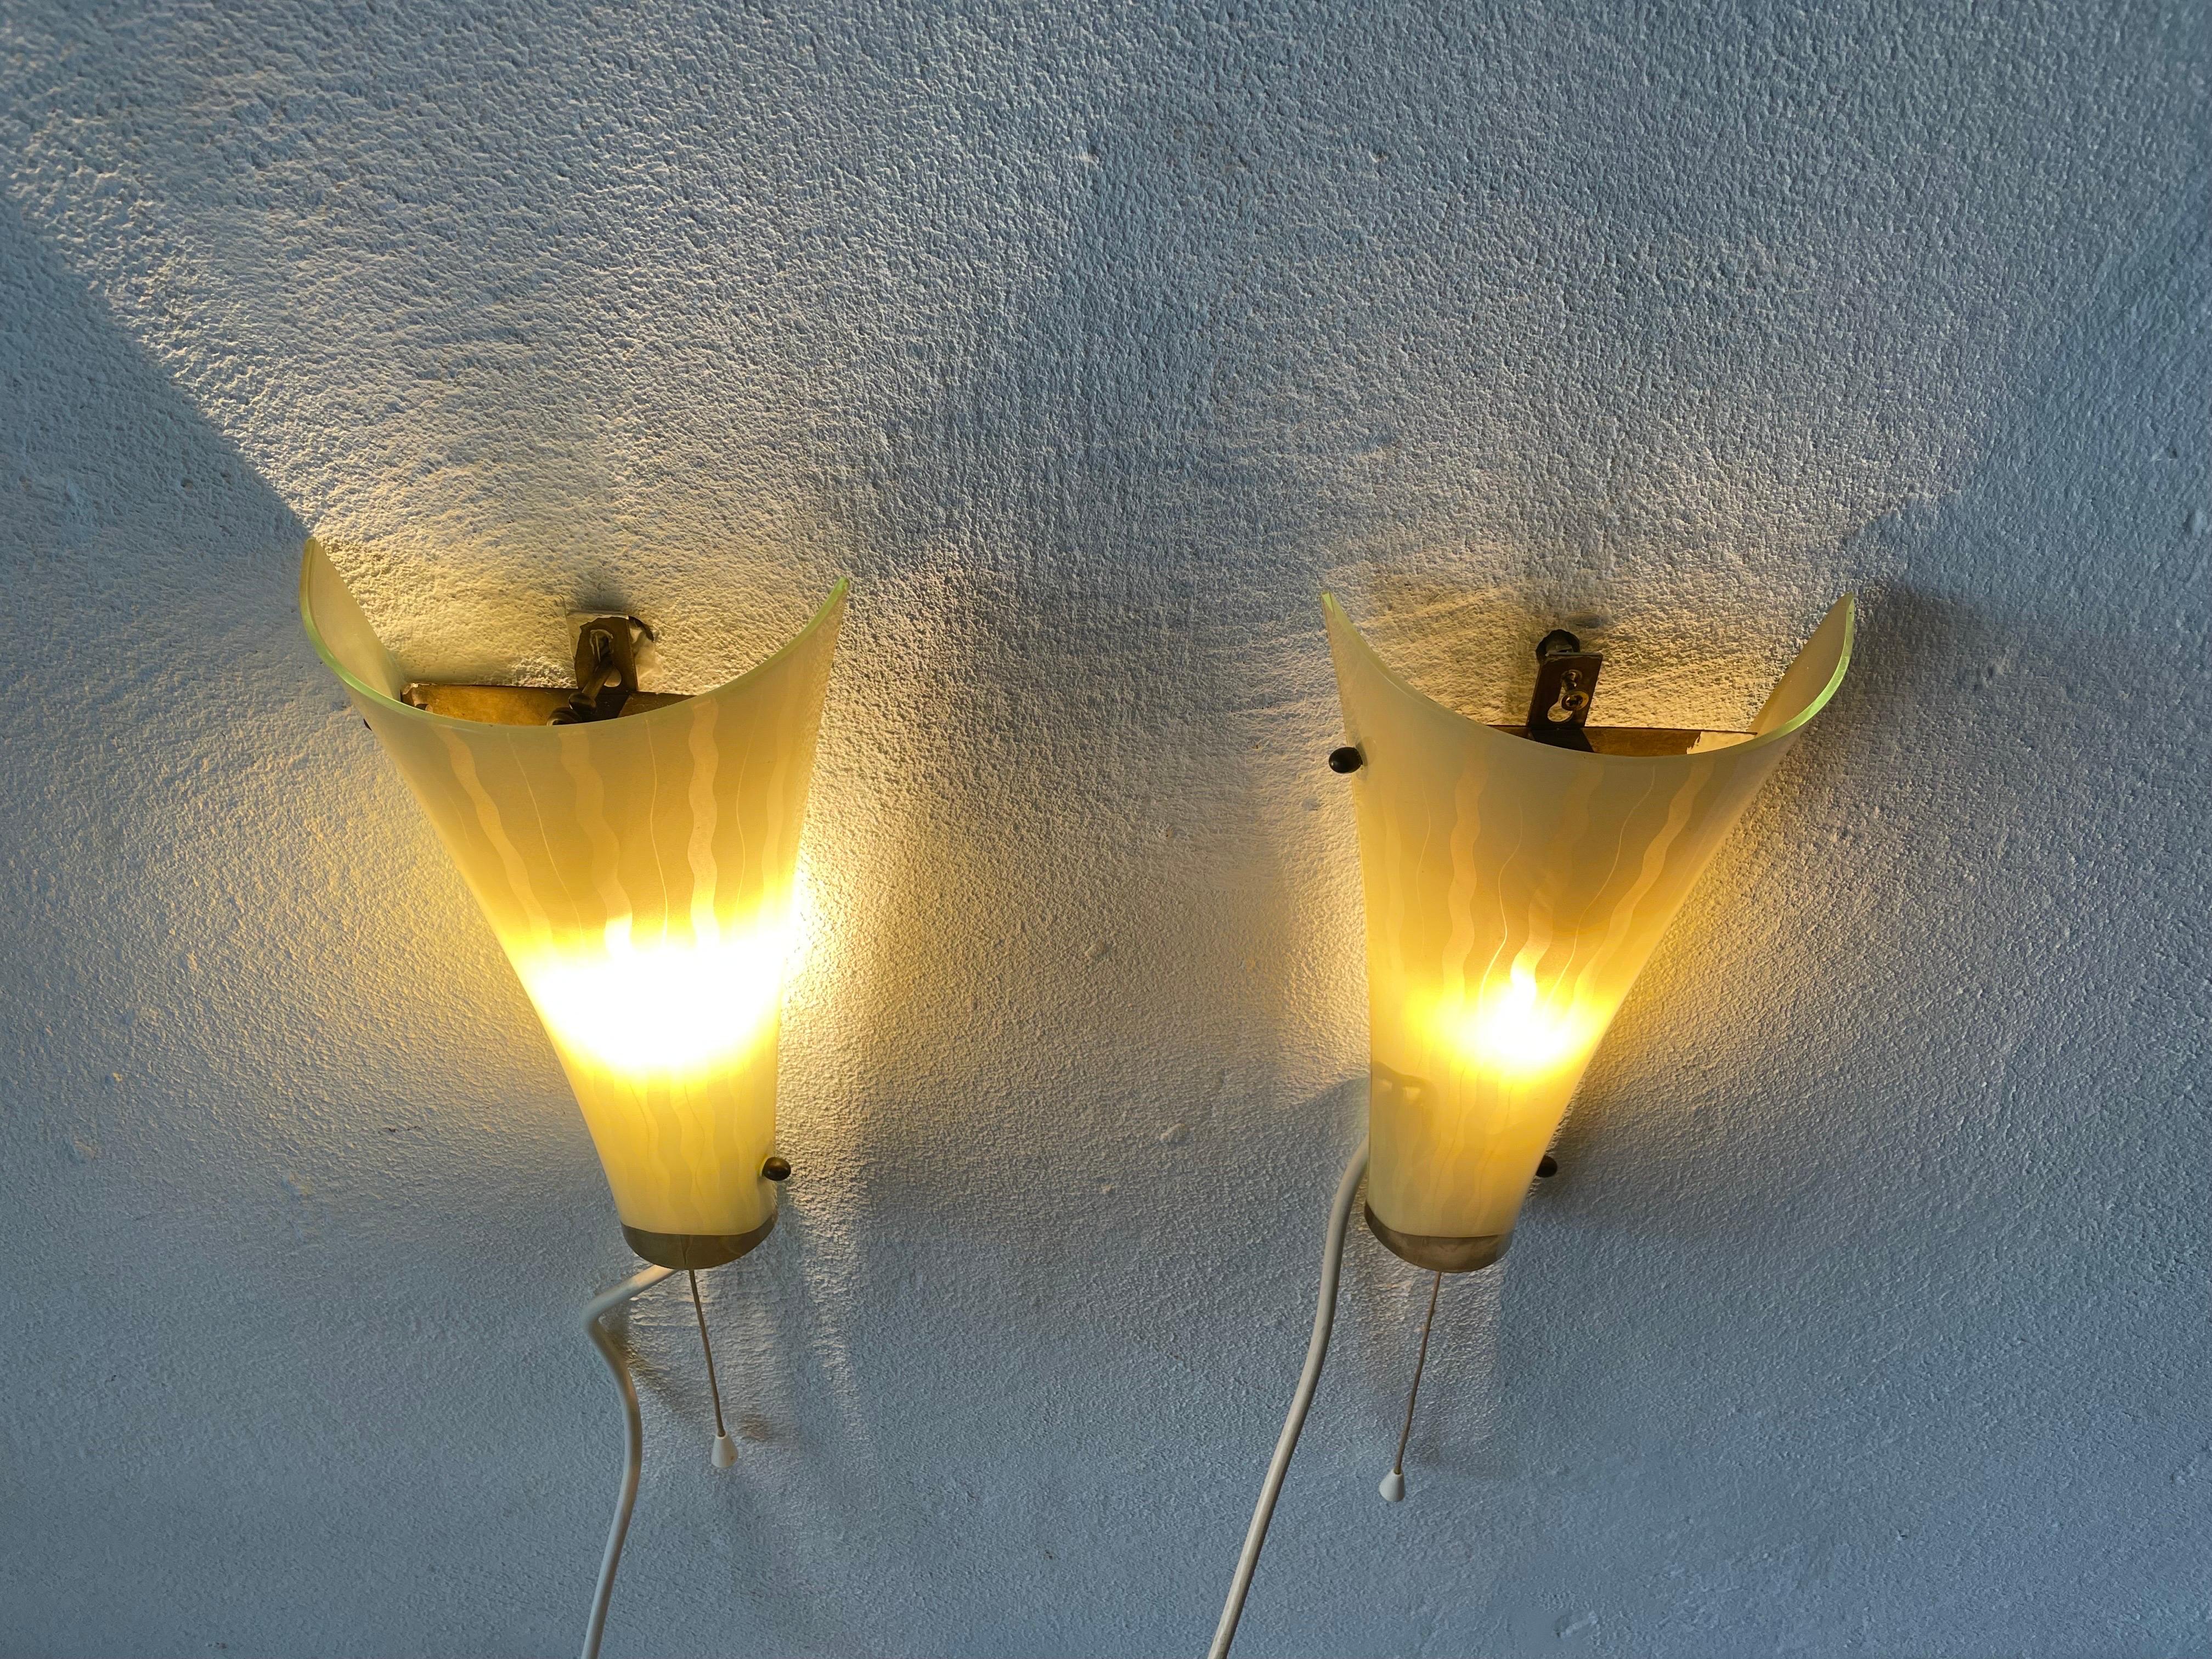 Mid-century Green Curved Glass Pair of Sconces, 1950s, Germany For Sale 7